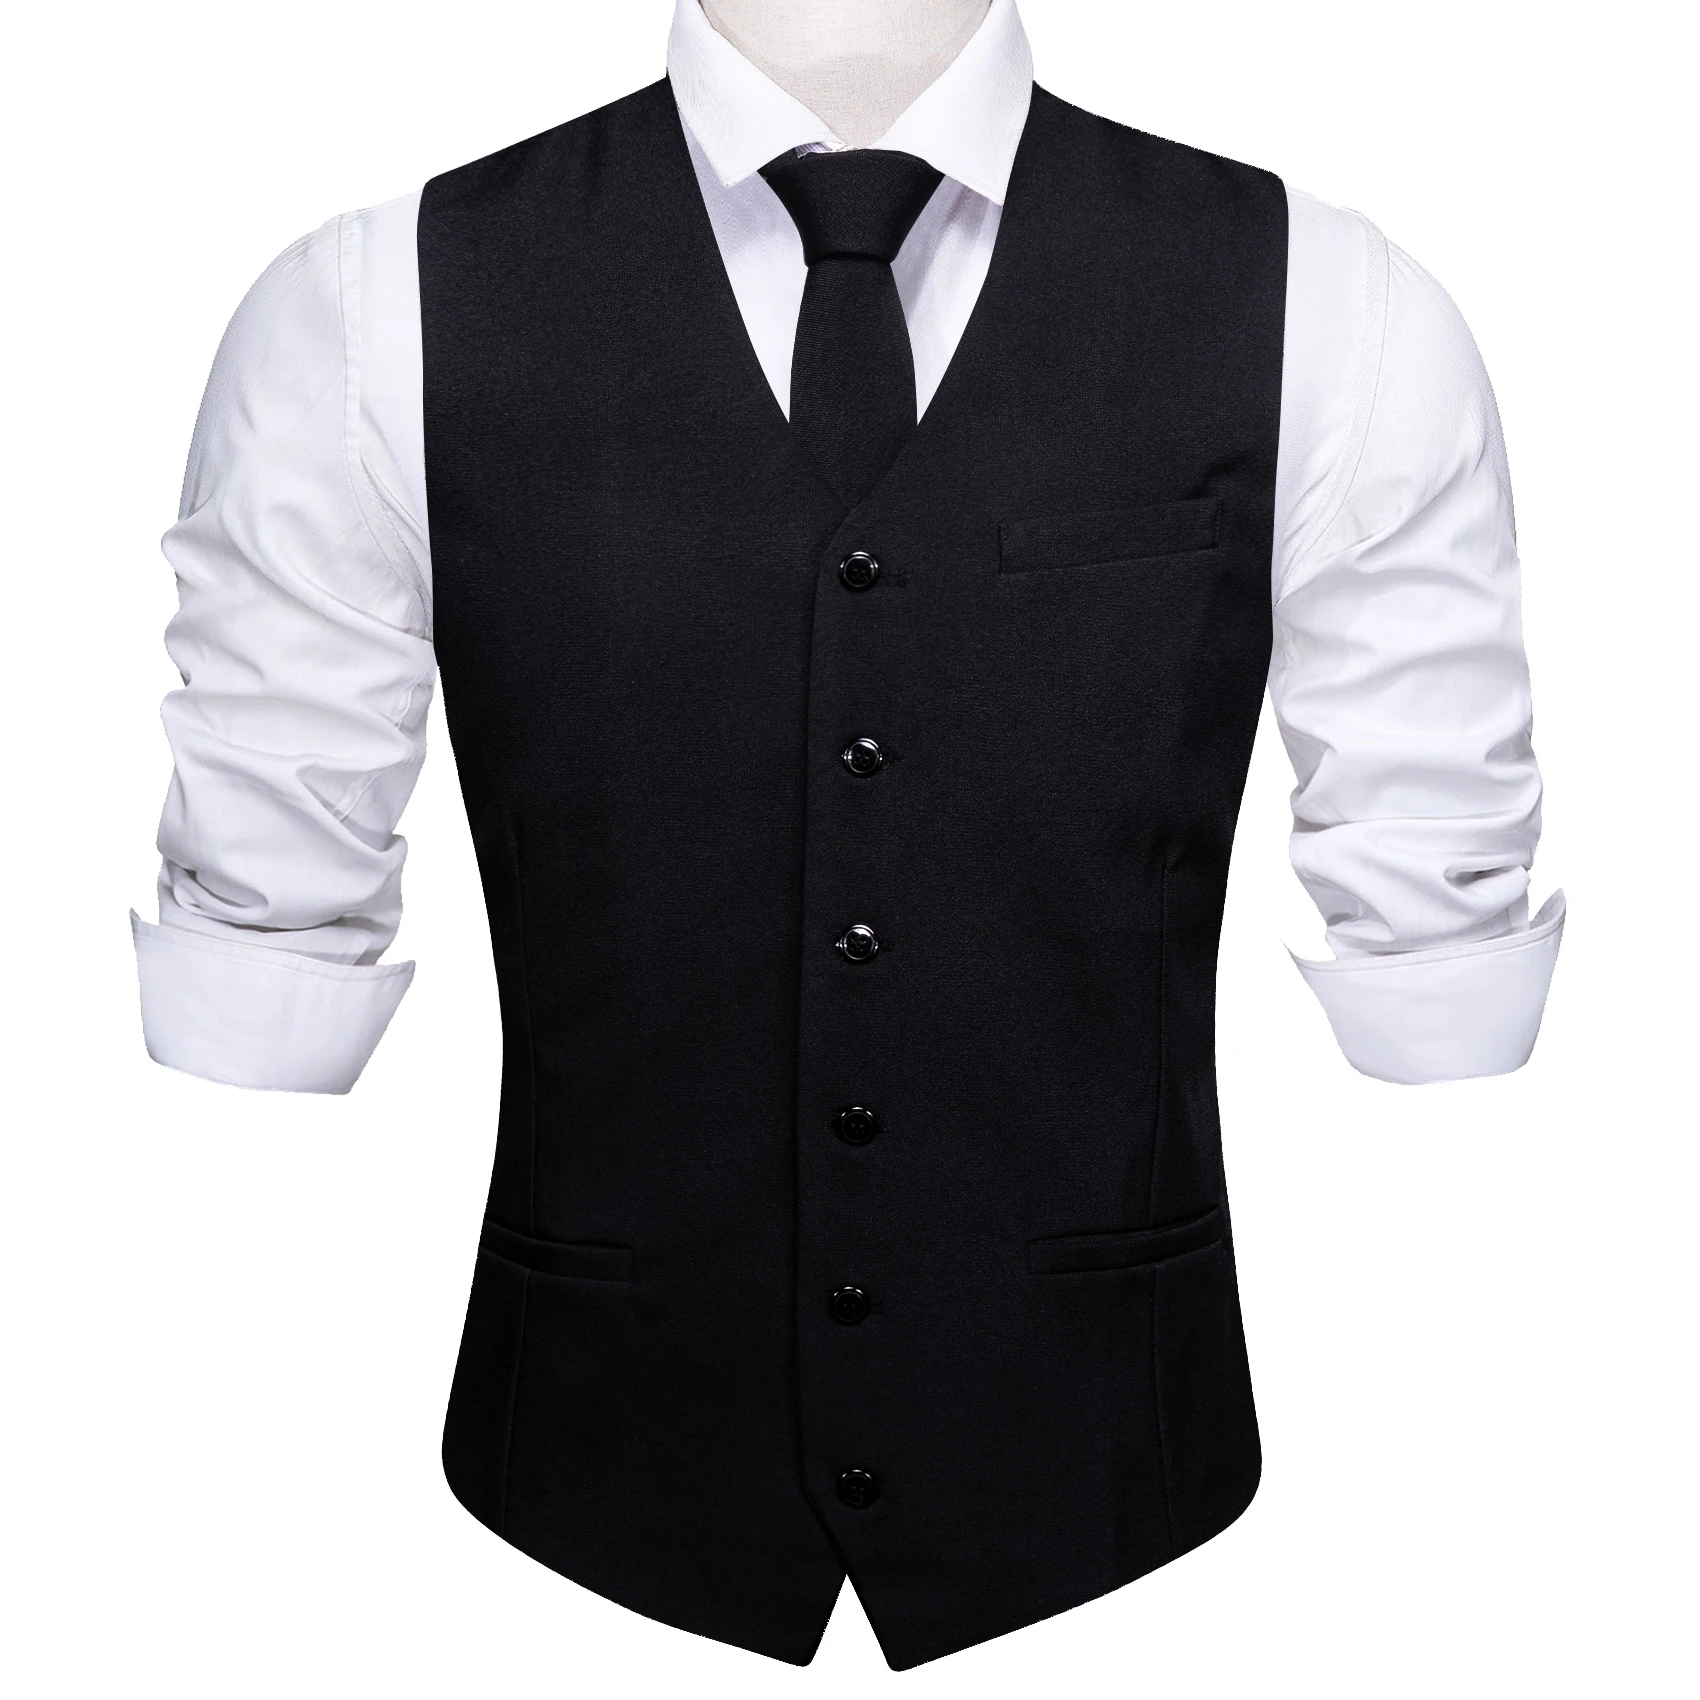 

Black Business Men Vest Set Classic Good Quality Tie V-Neck Waistcoat SleevessSuit Casual Fit Party Wedding Barry.Wang GM-2329